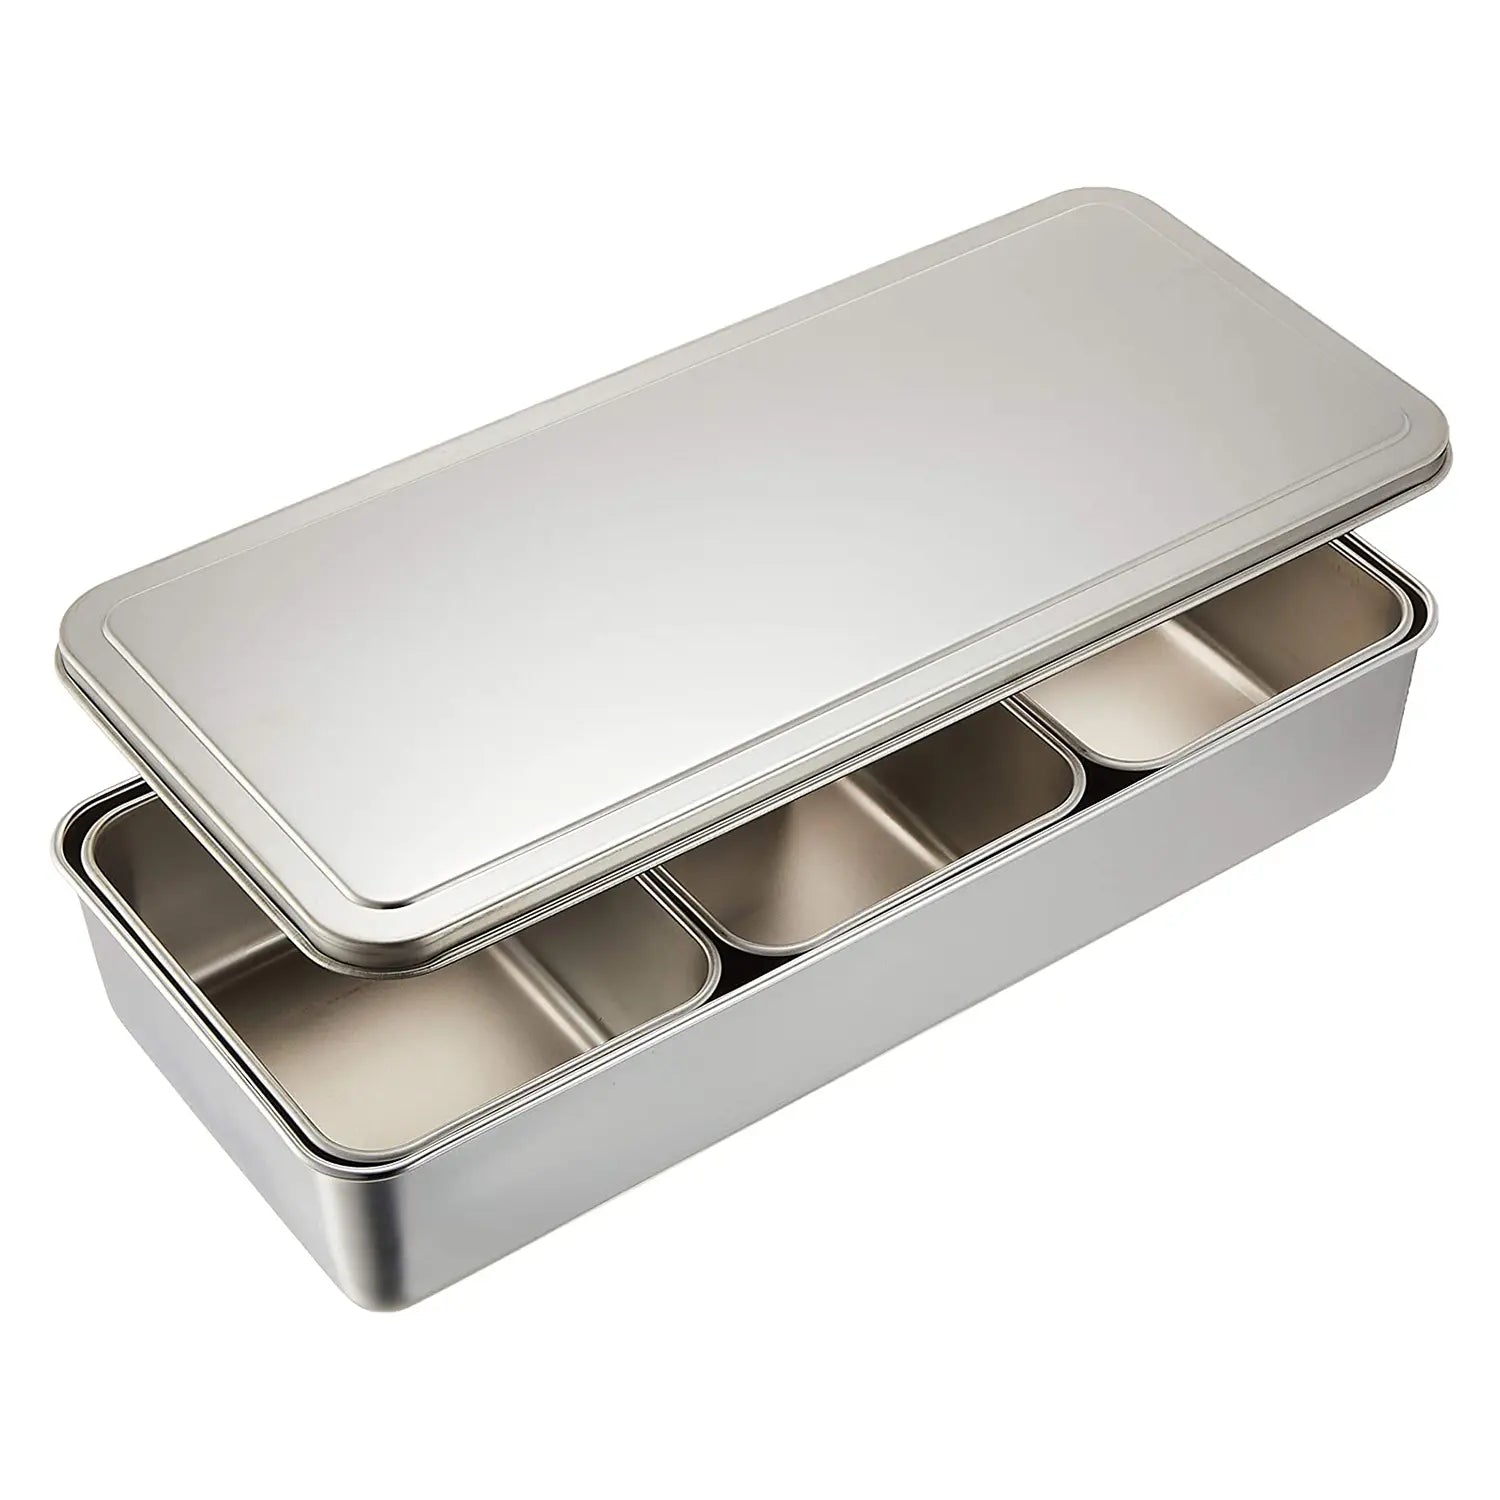 Mise en Place Yakumi Pan - 3 Compartment with Lid